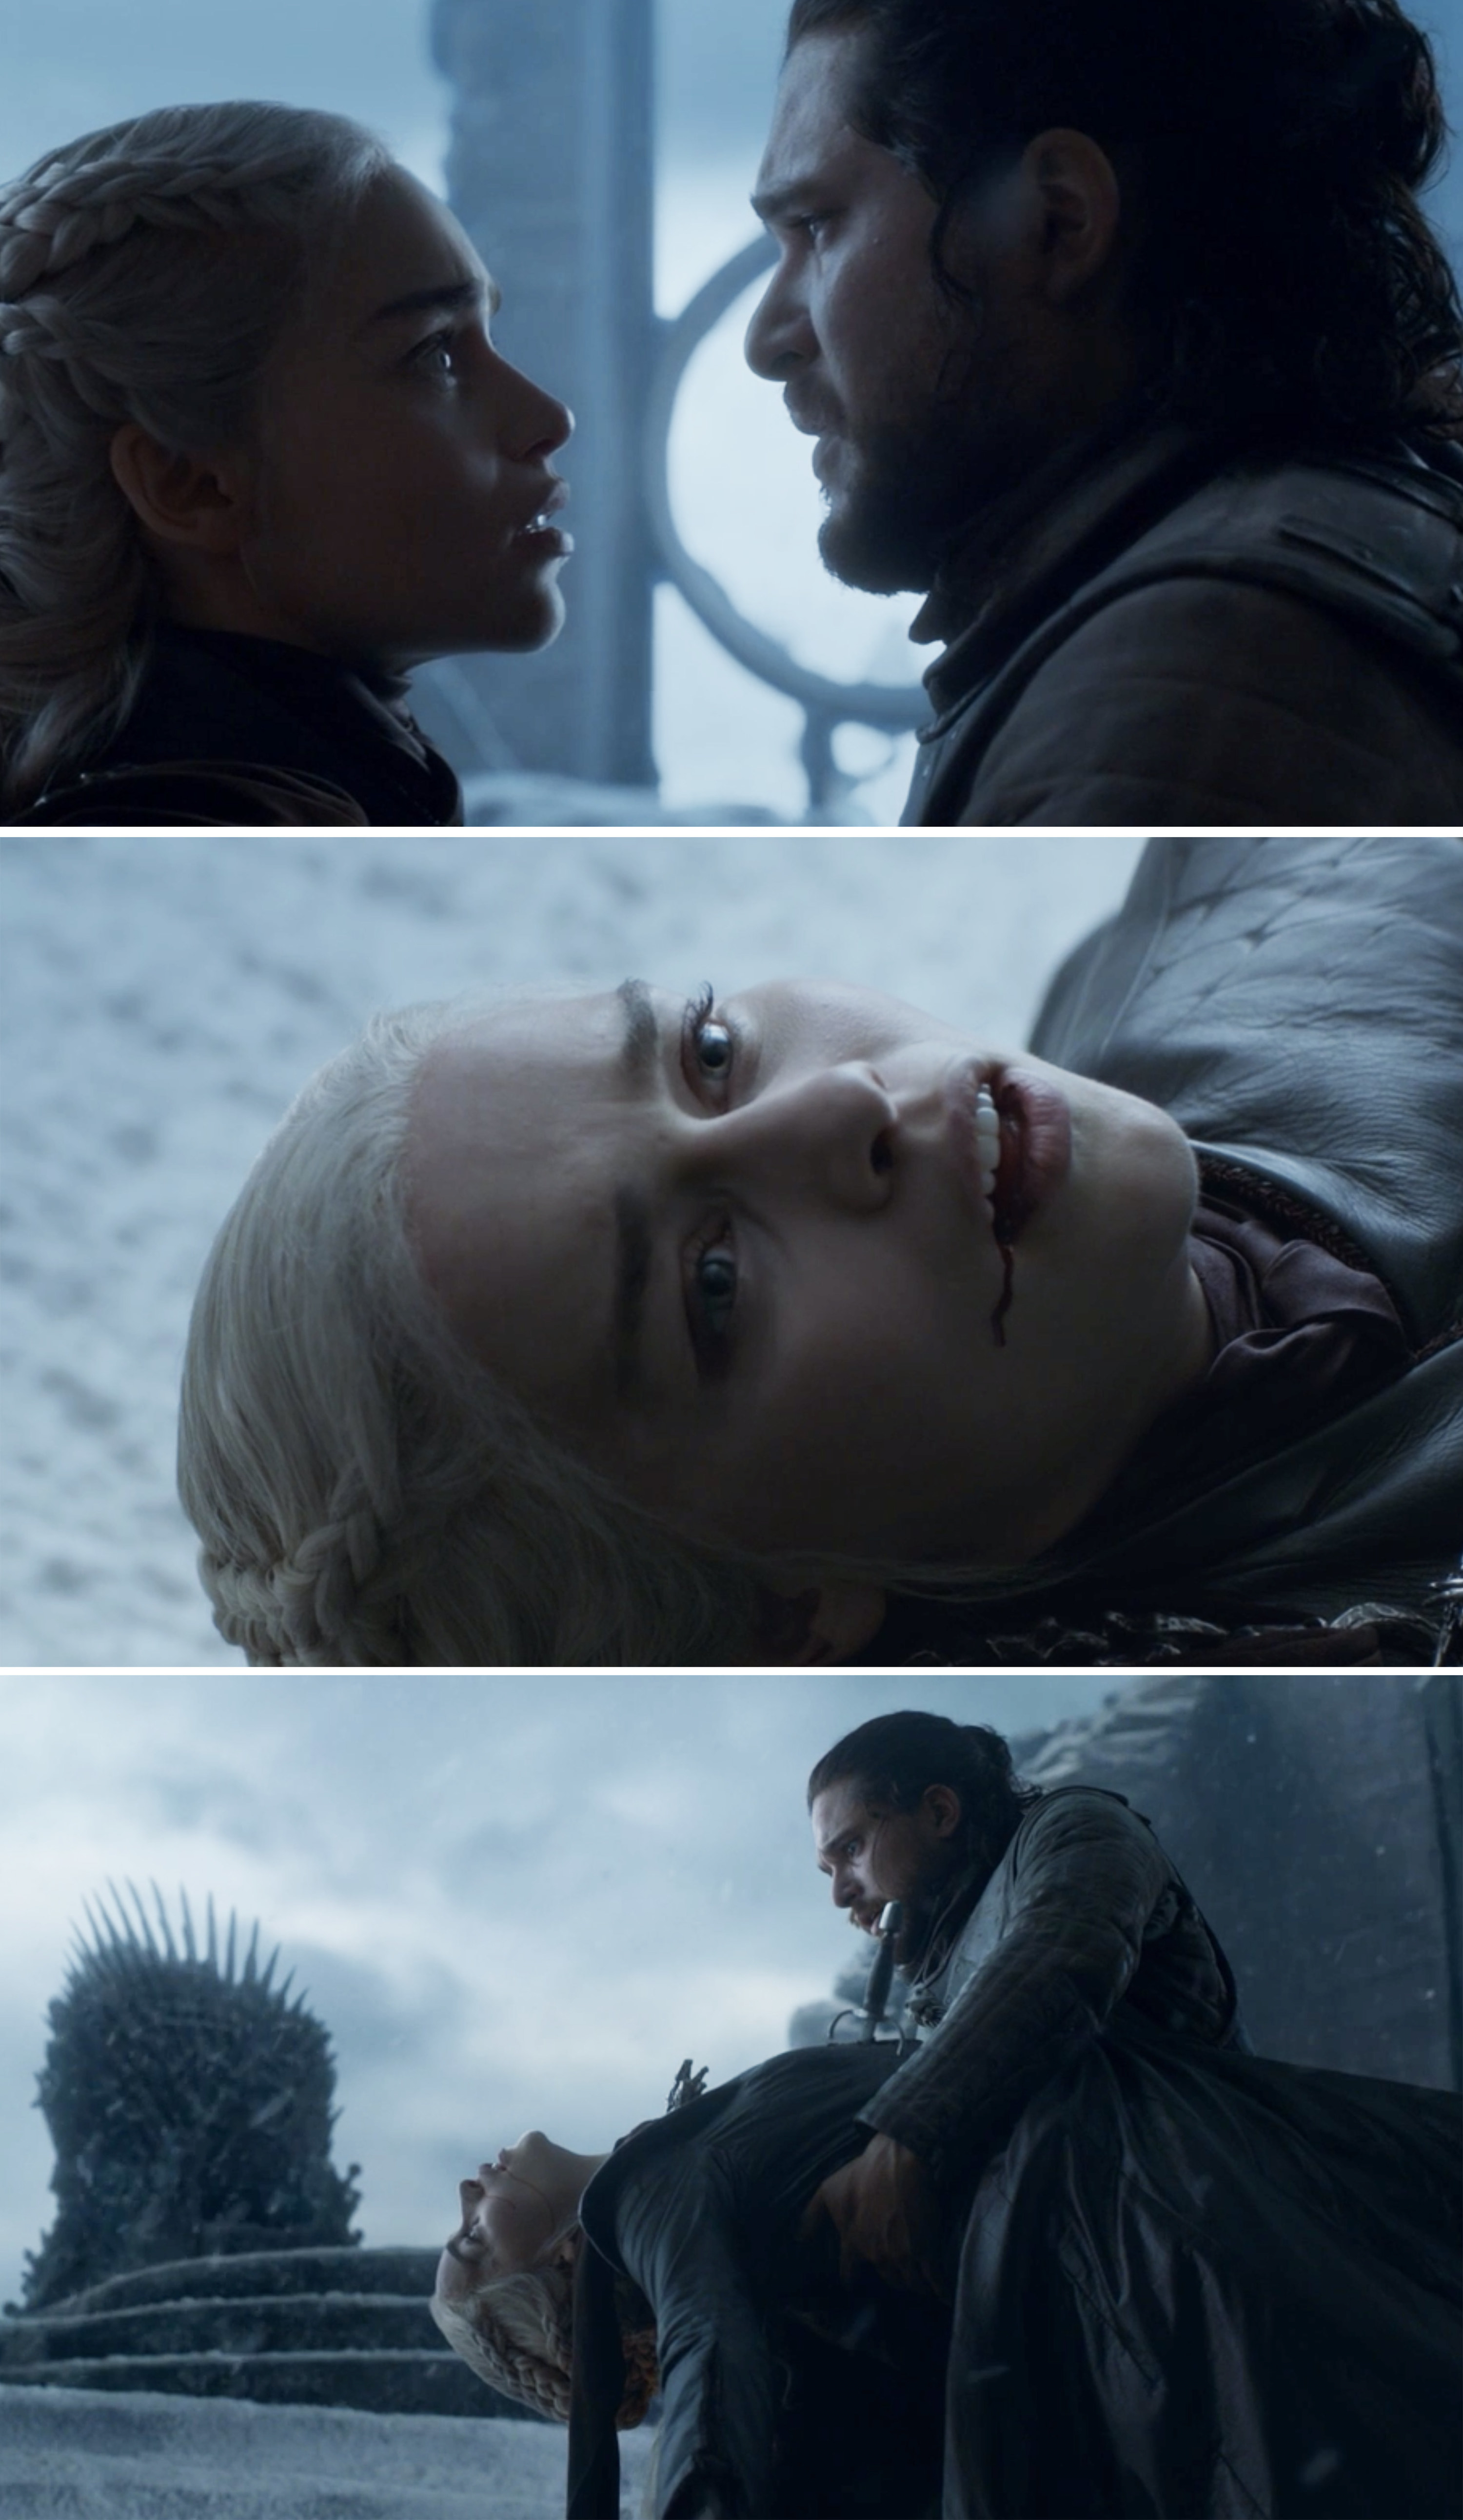 Jon stabbing Dany and her dying